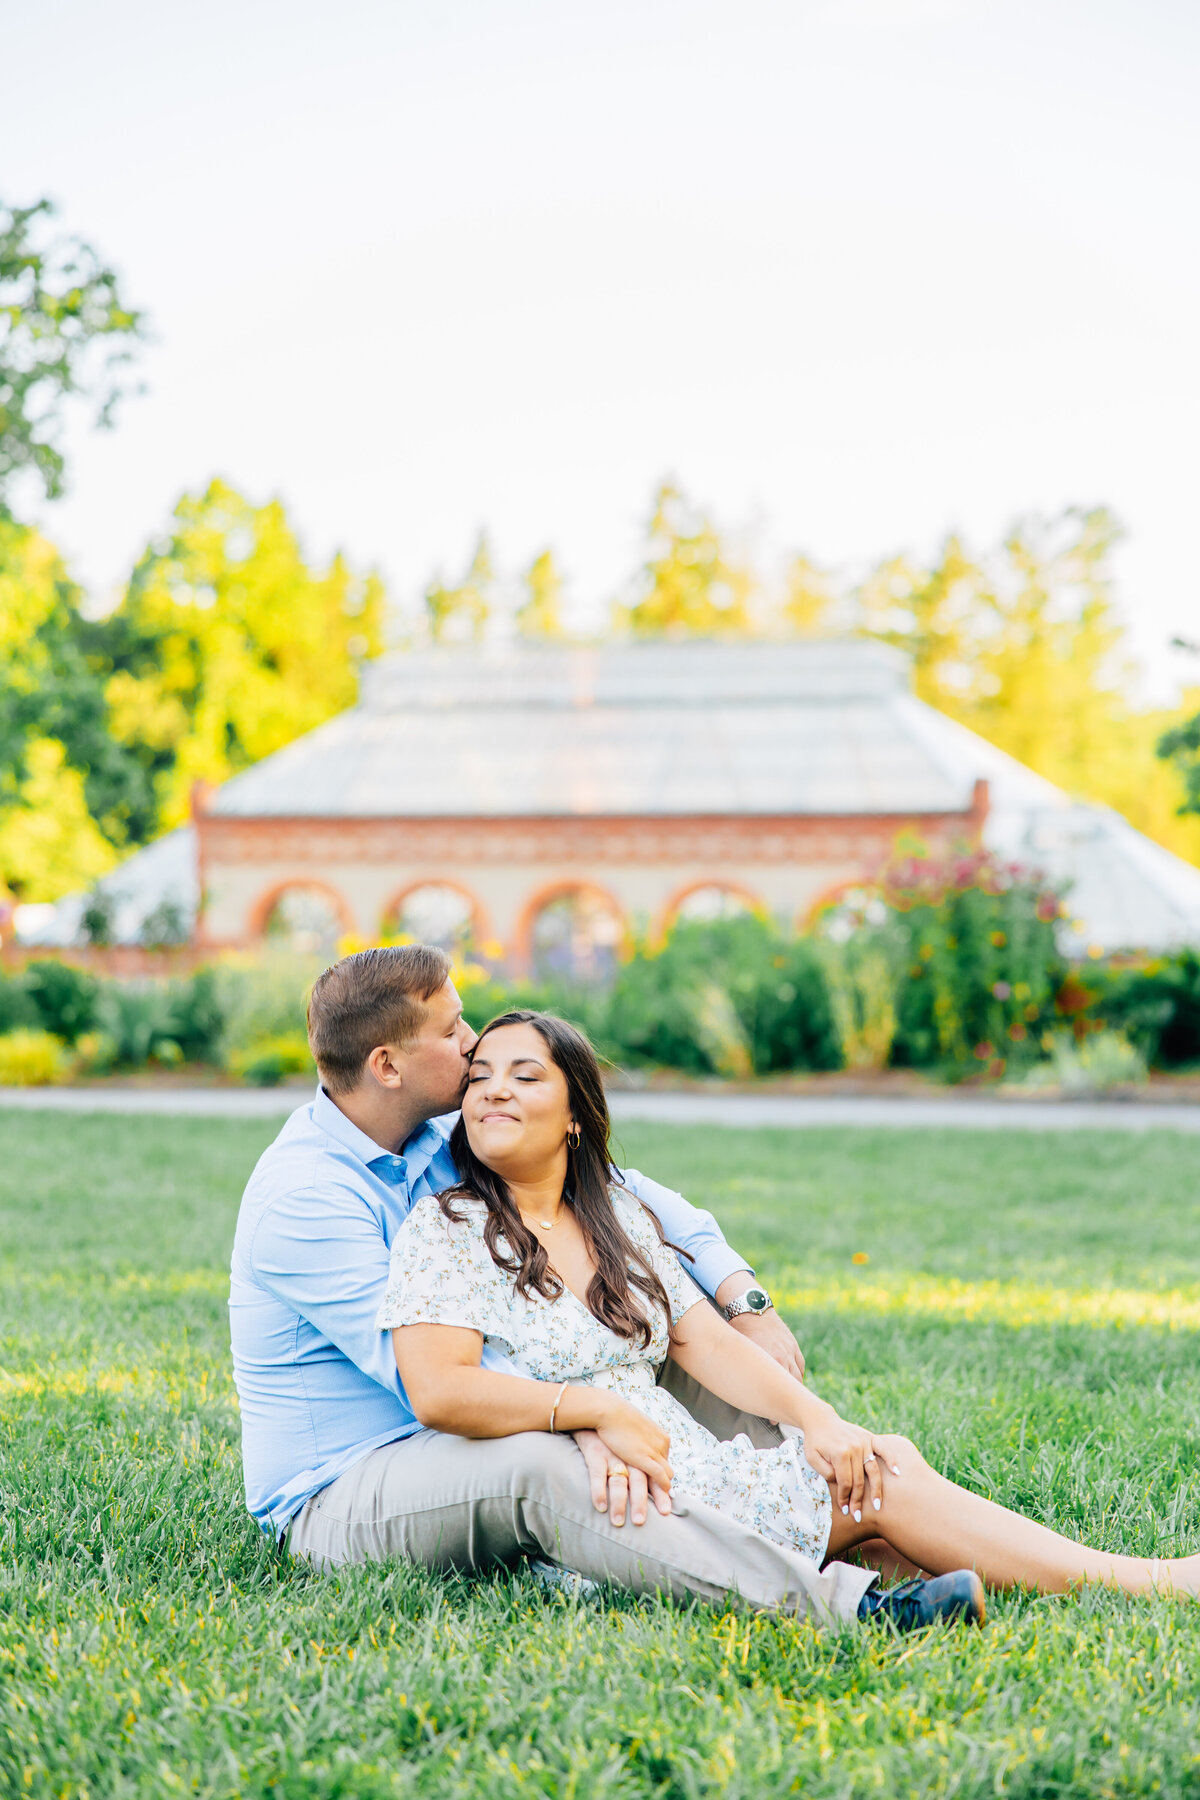 Jessica & Ryan Engagements at Biltmore Estate - Tracy Waldrop Photography-22